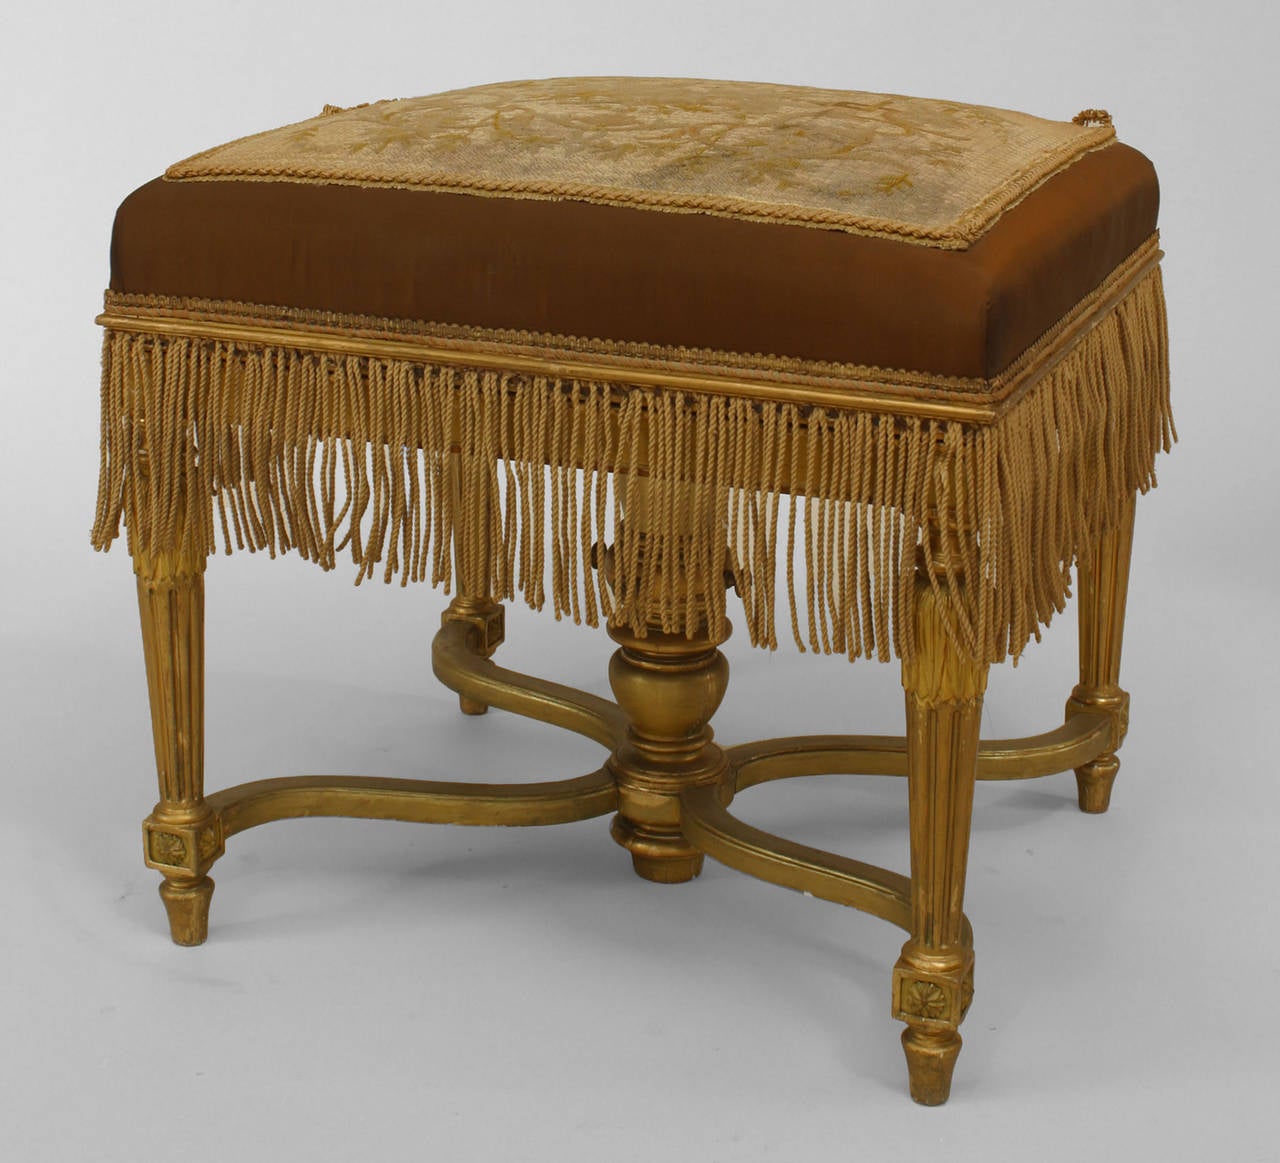 French Louis XVI style (19th Century) gilt bench with stretcher and embroidered seat with a fringe.
